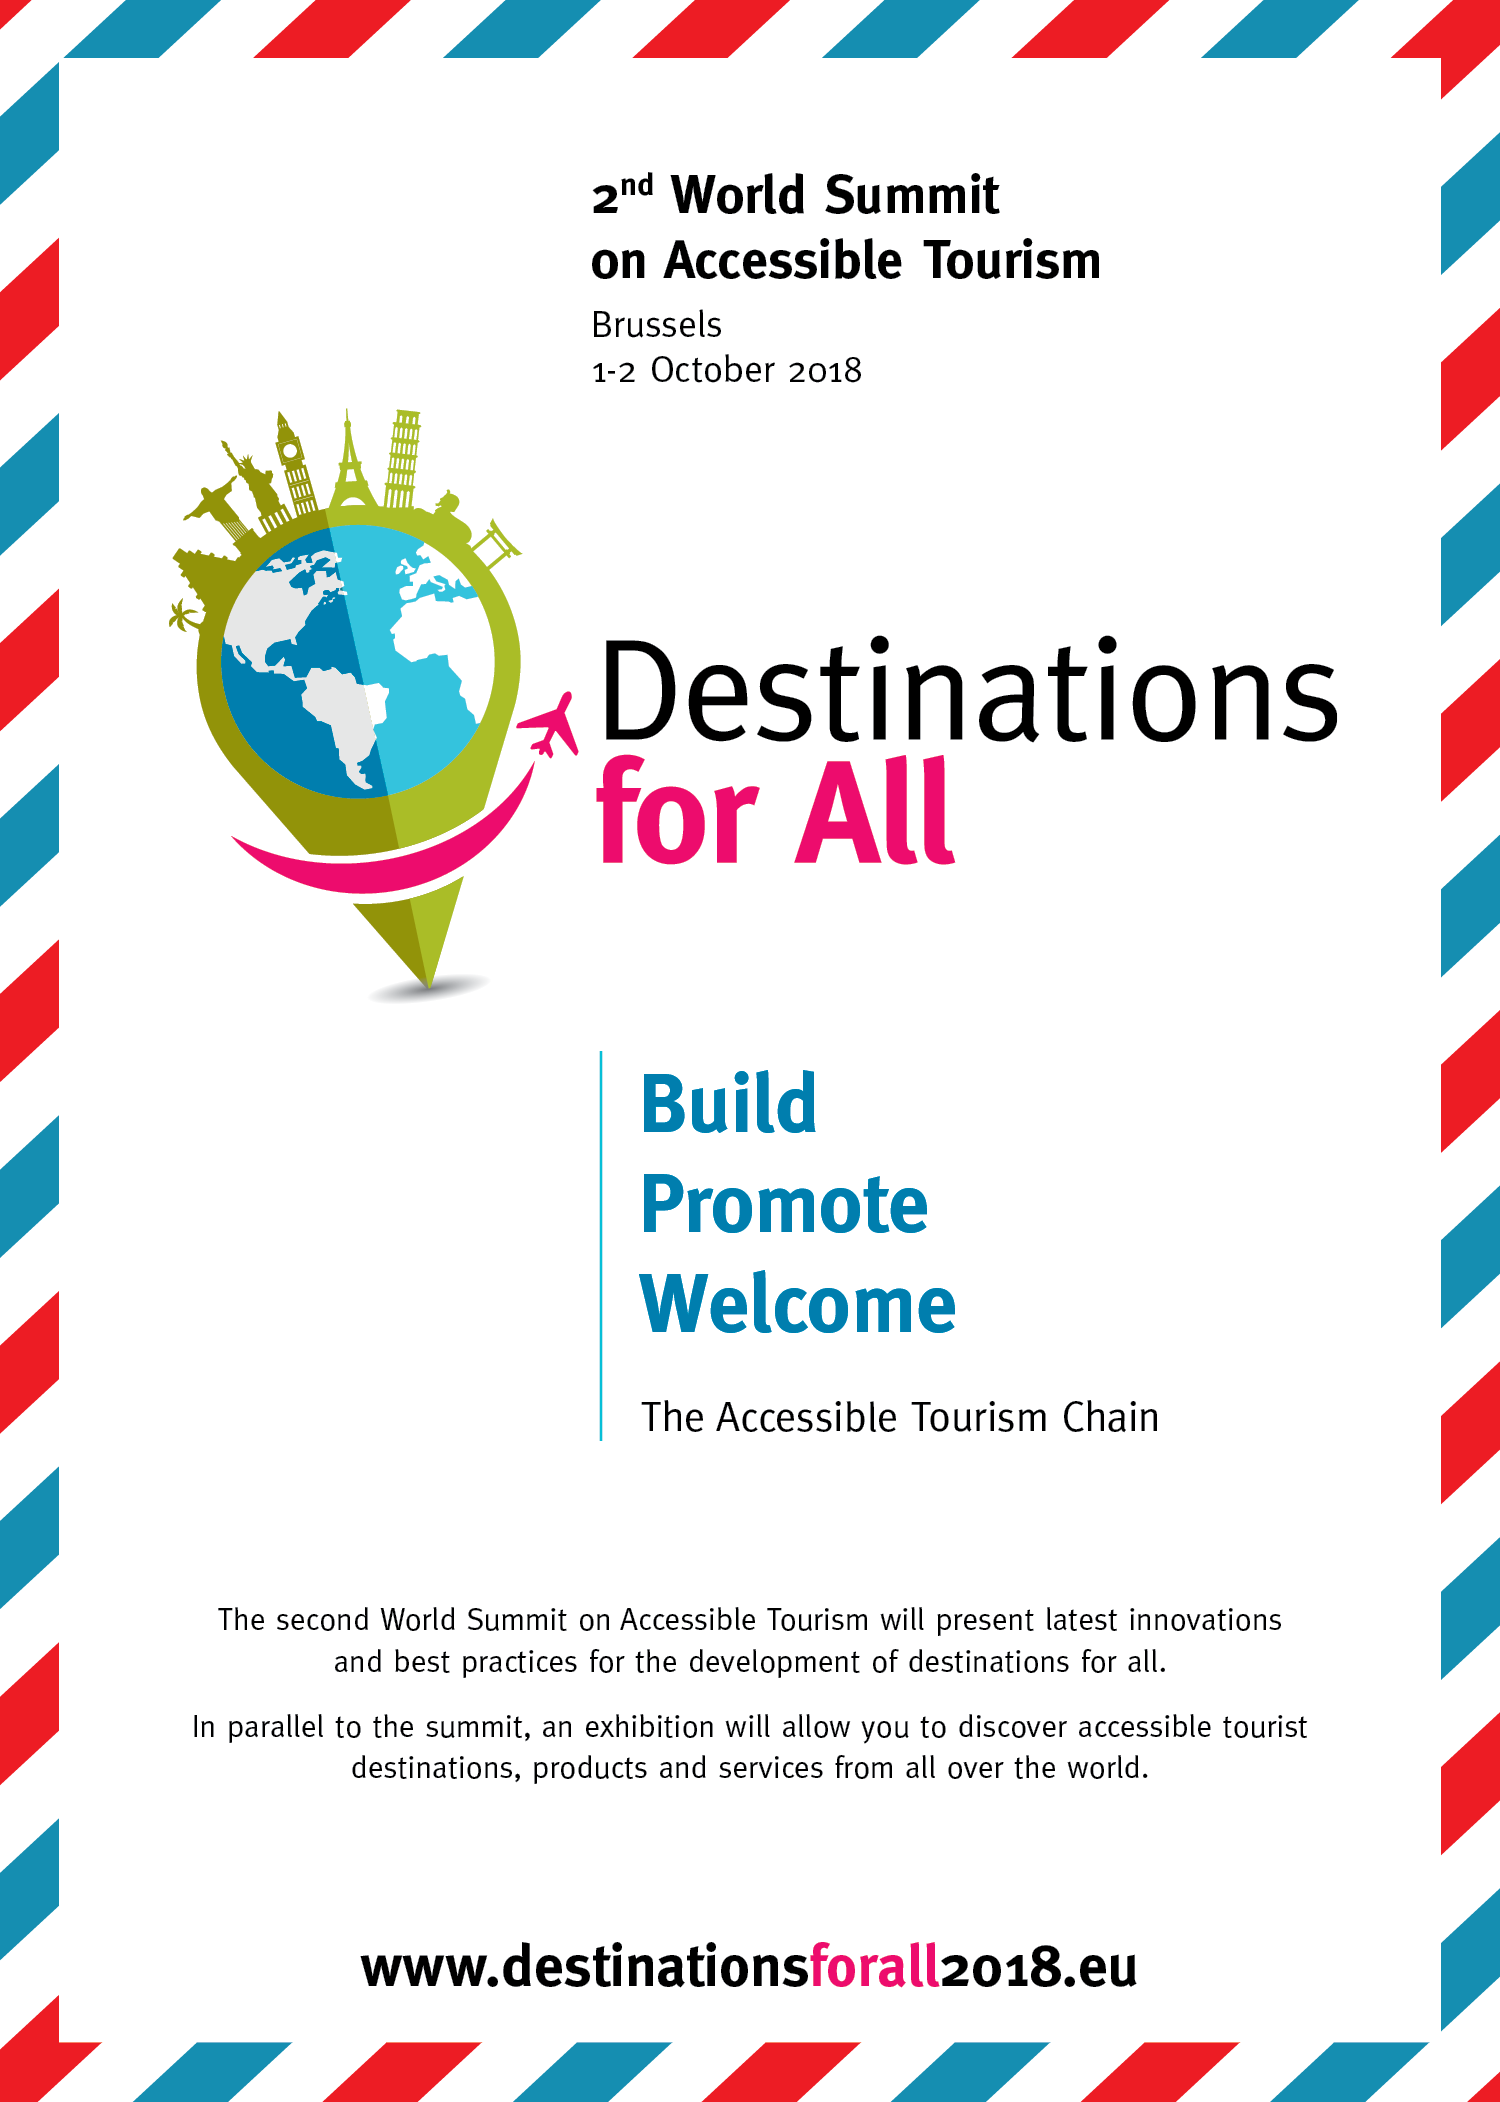 Download Destinations-for-All-2018-Post-card-GB.pdf